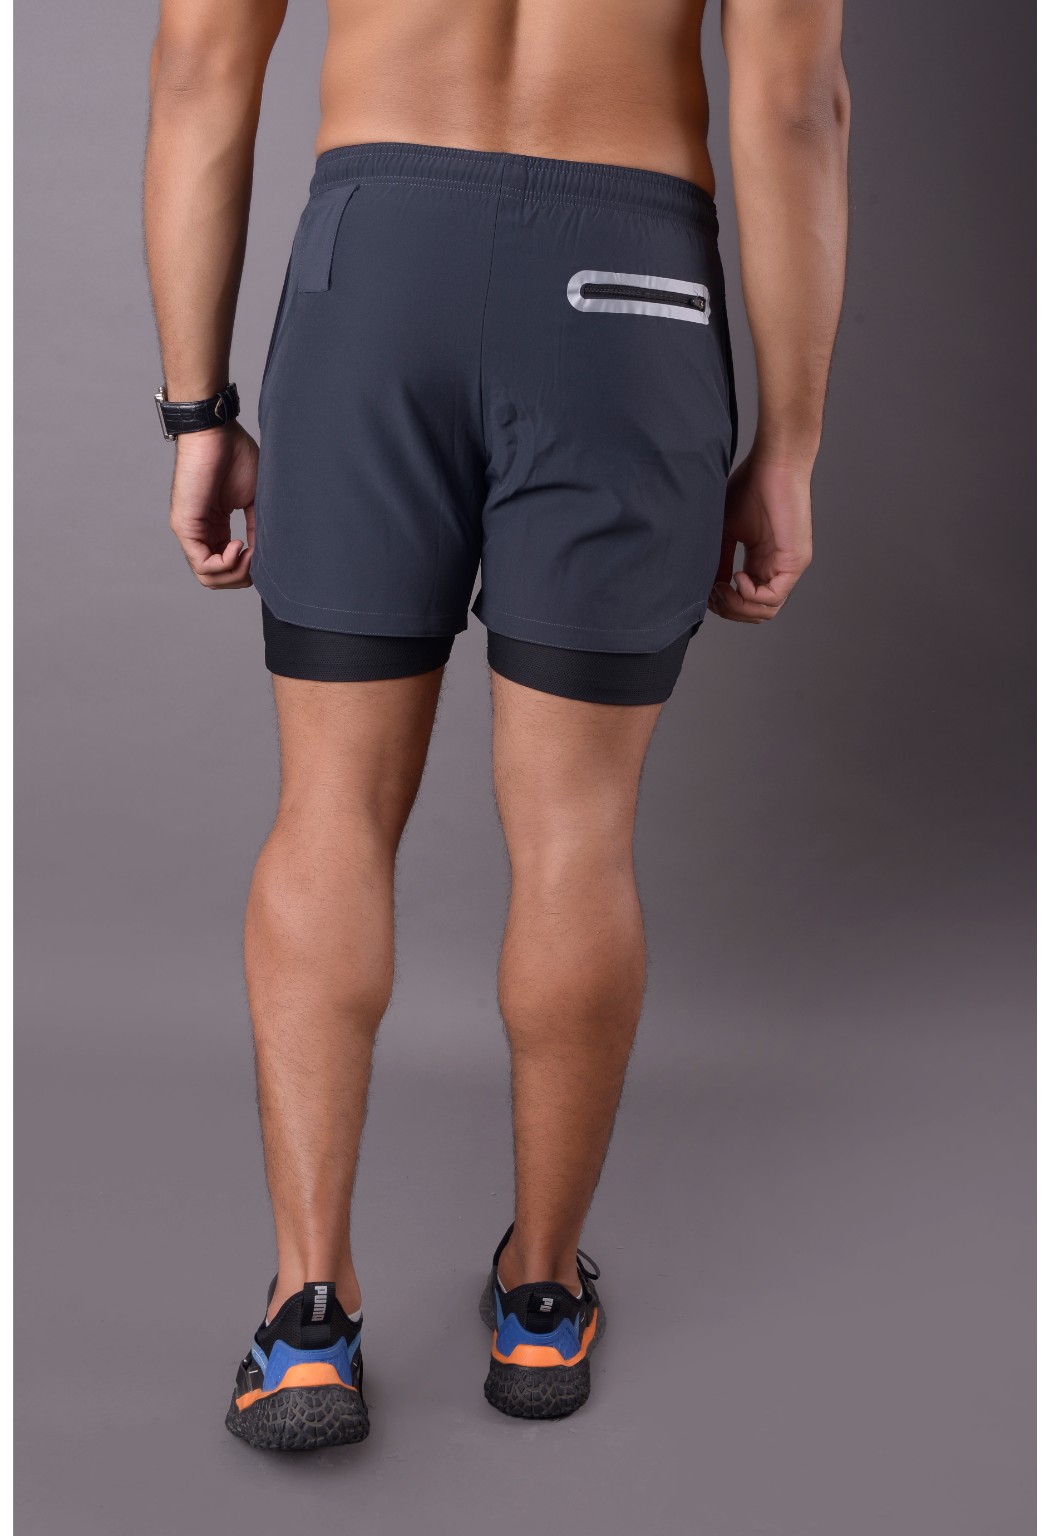 Limitless 2-IN-1 Shorts – Charcoal & Black – Fitlethics